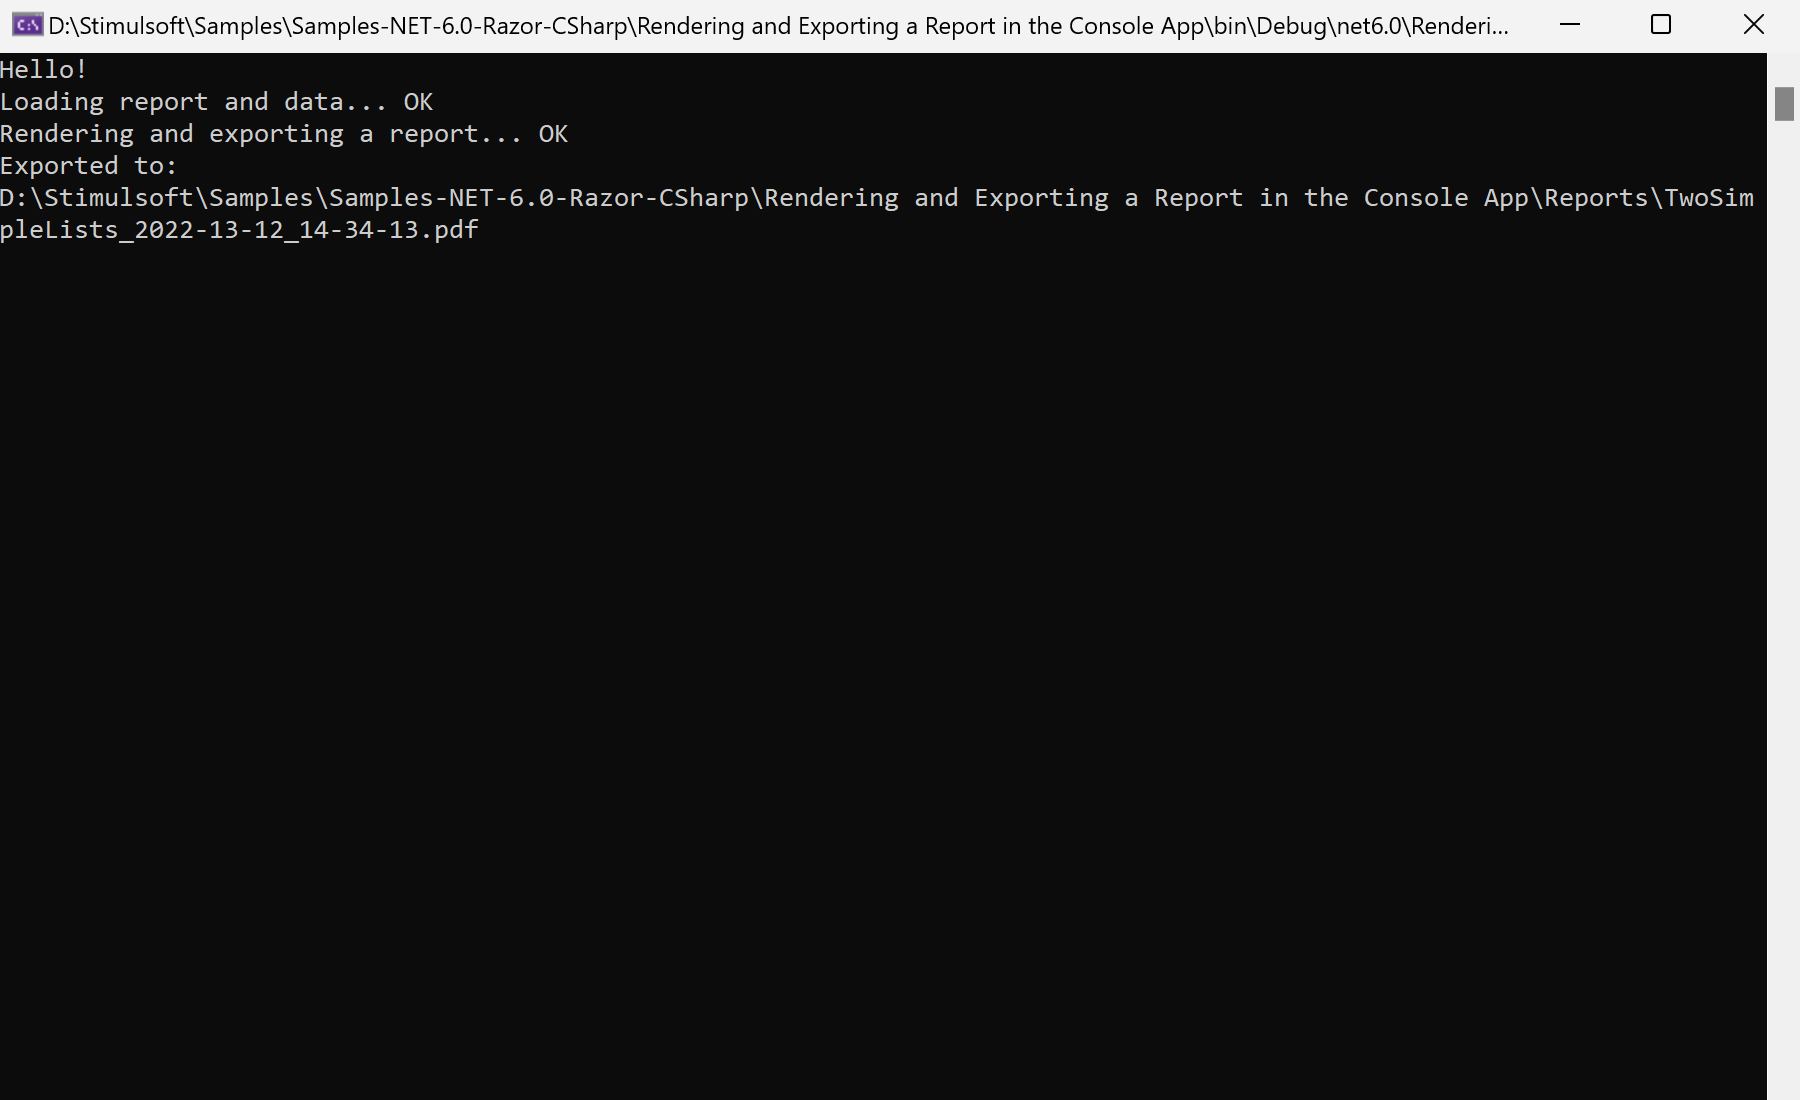 Rendering and Exporting a Report in the Console App